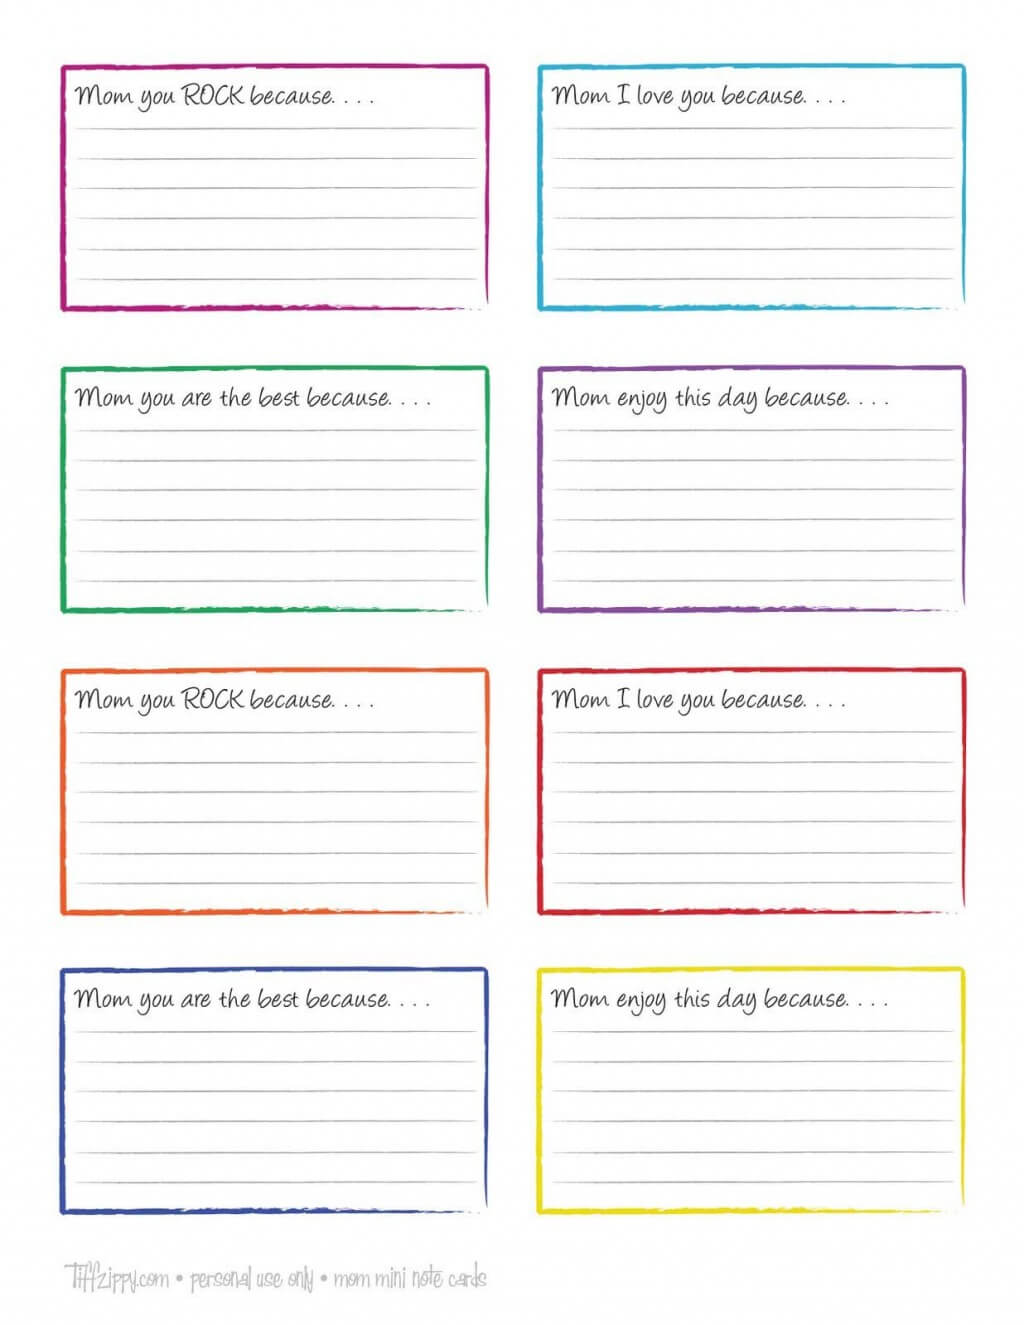 004 Free 4X6 Note Card Template Post Exceptional Ideas For 4X6 Note Card Template Word